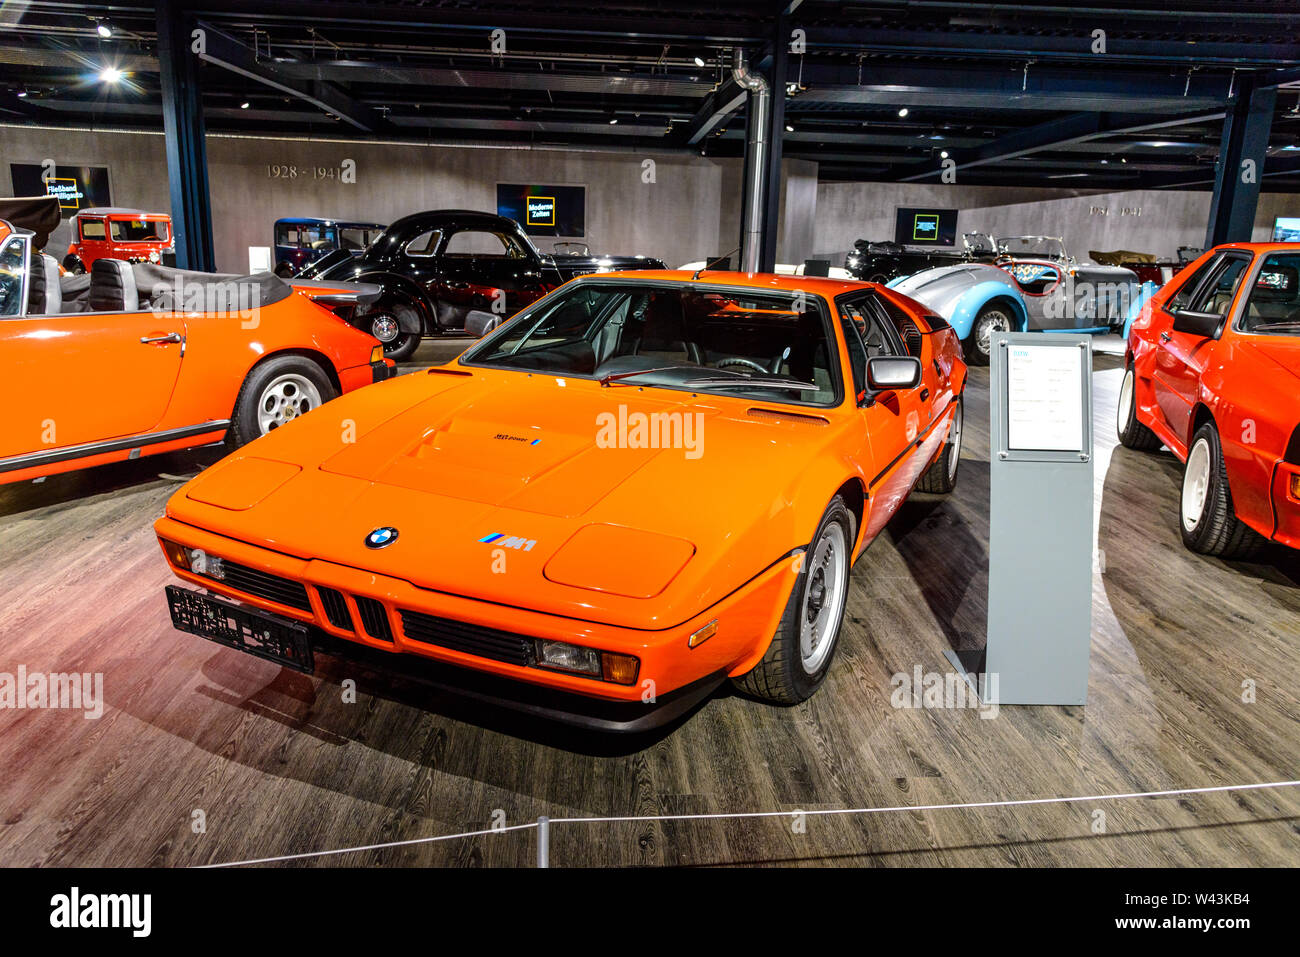 7 July 2019 - Museum EFA Mobile Zeiten in Amerang, Germany: BMW M1 Coupe 1979 - 1981. Retro car, oldtimer Stock Photo